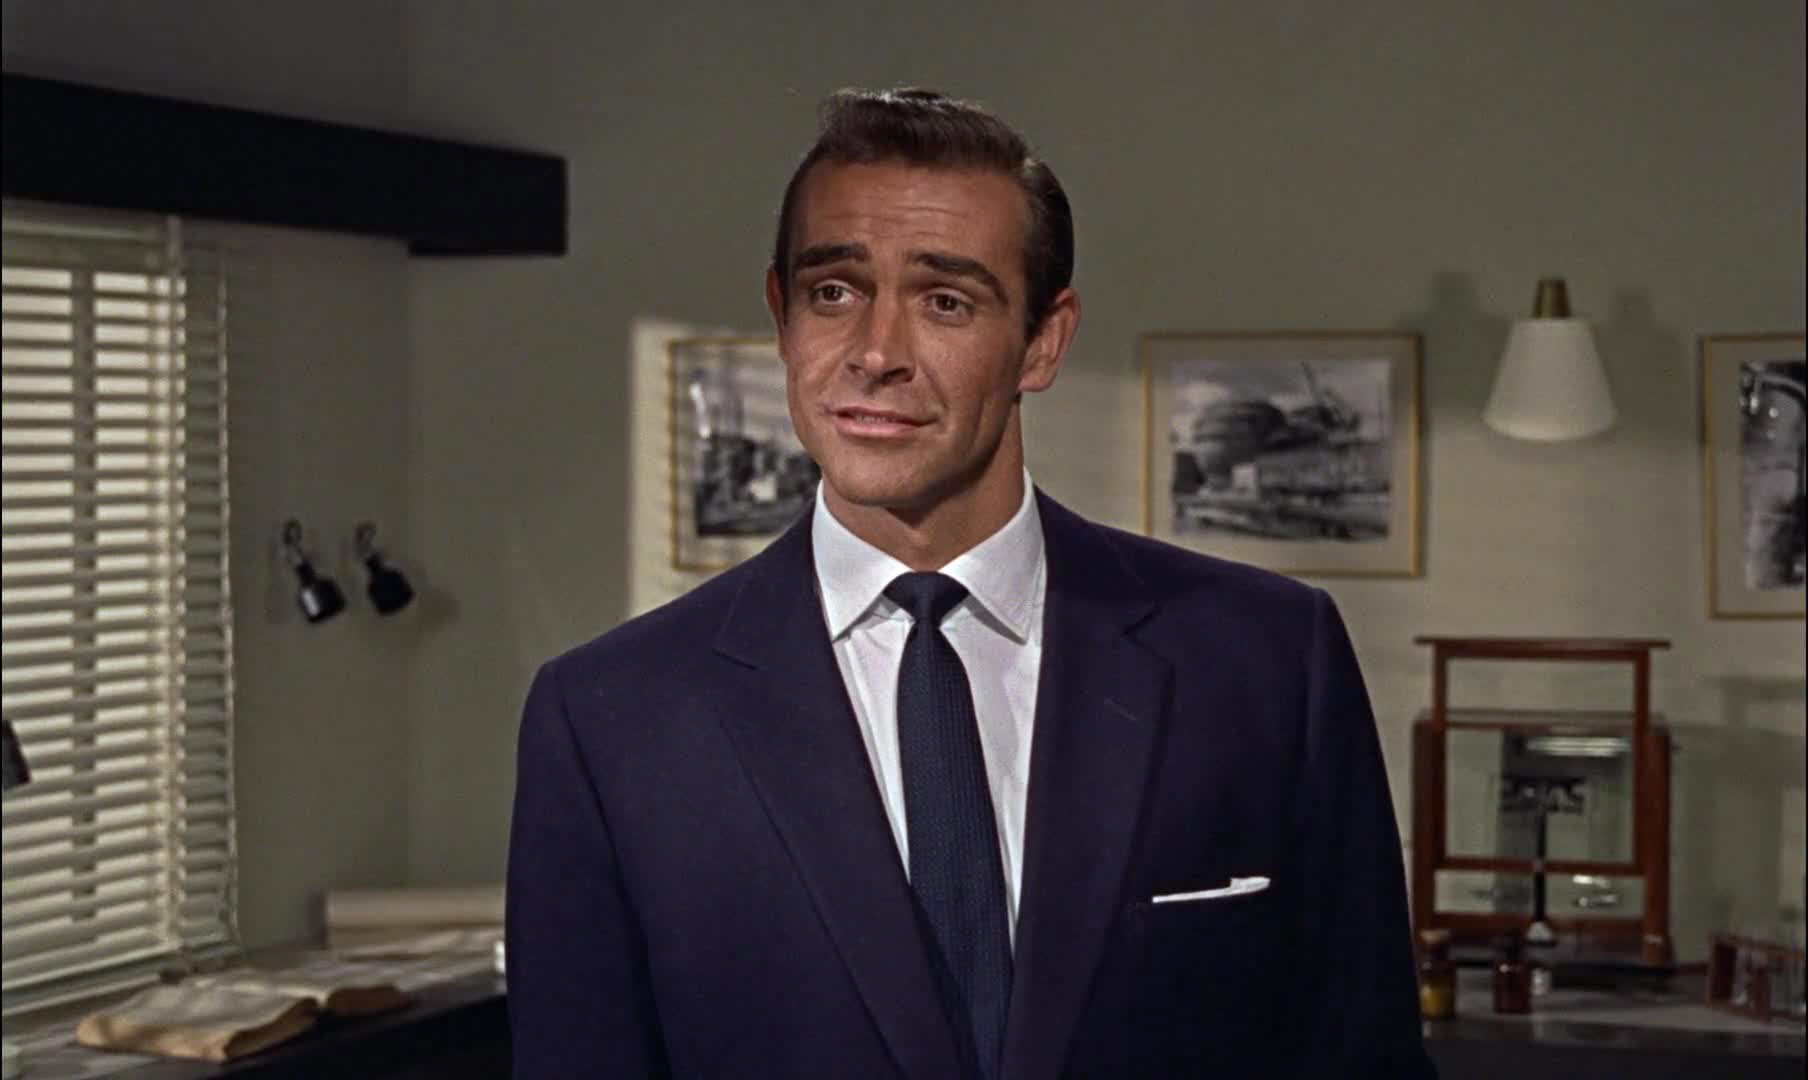 Sean Connery as Bond wears a classic fit suit